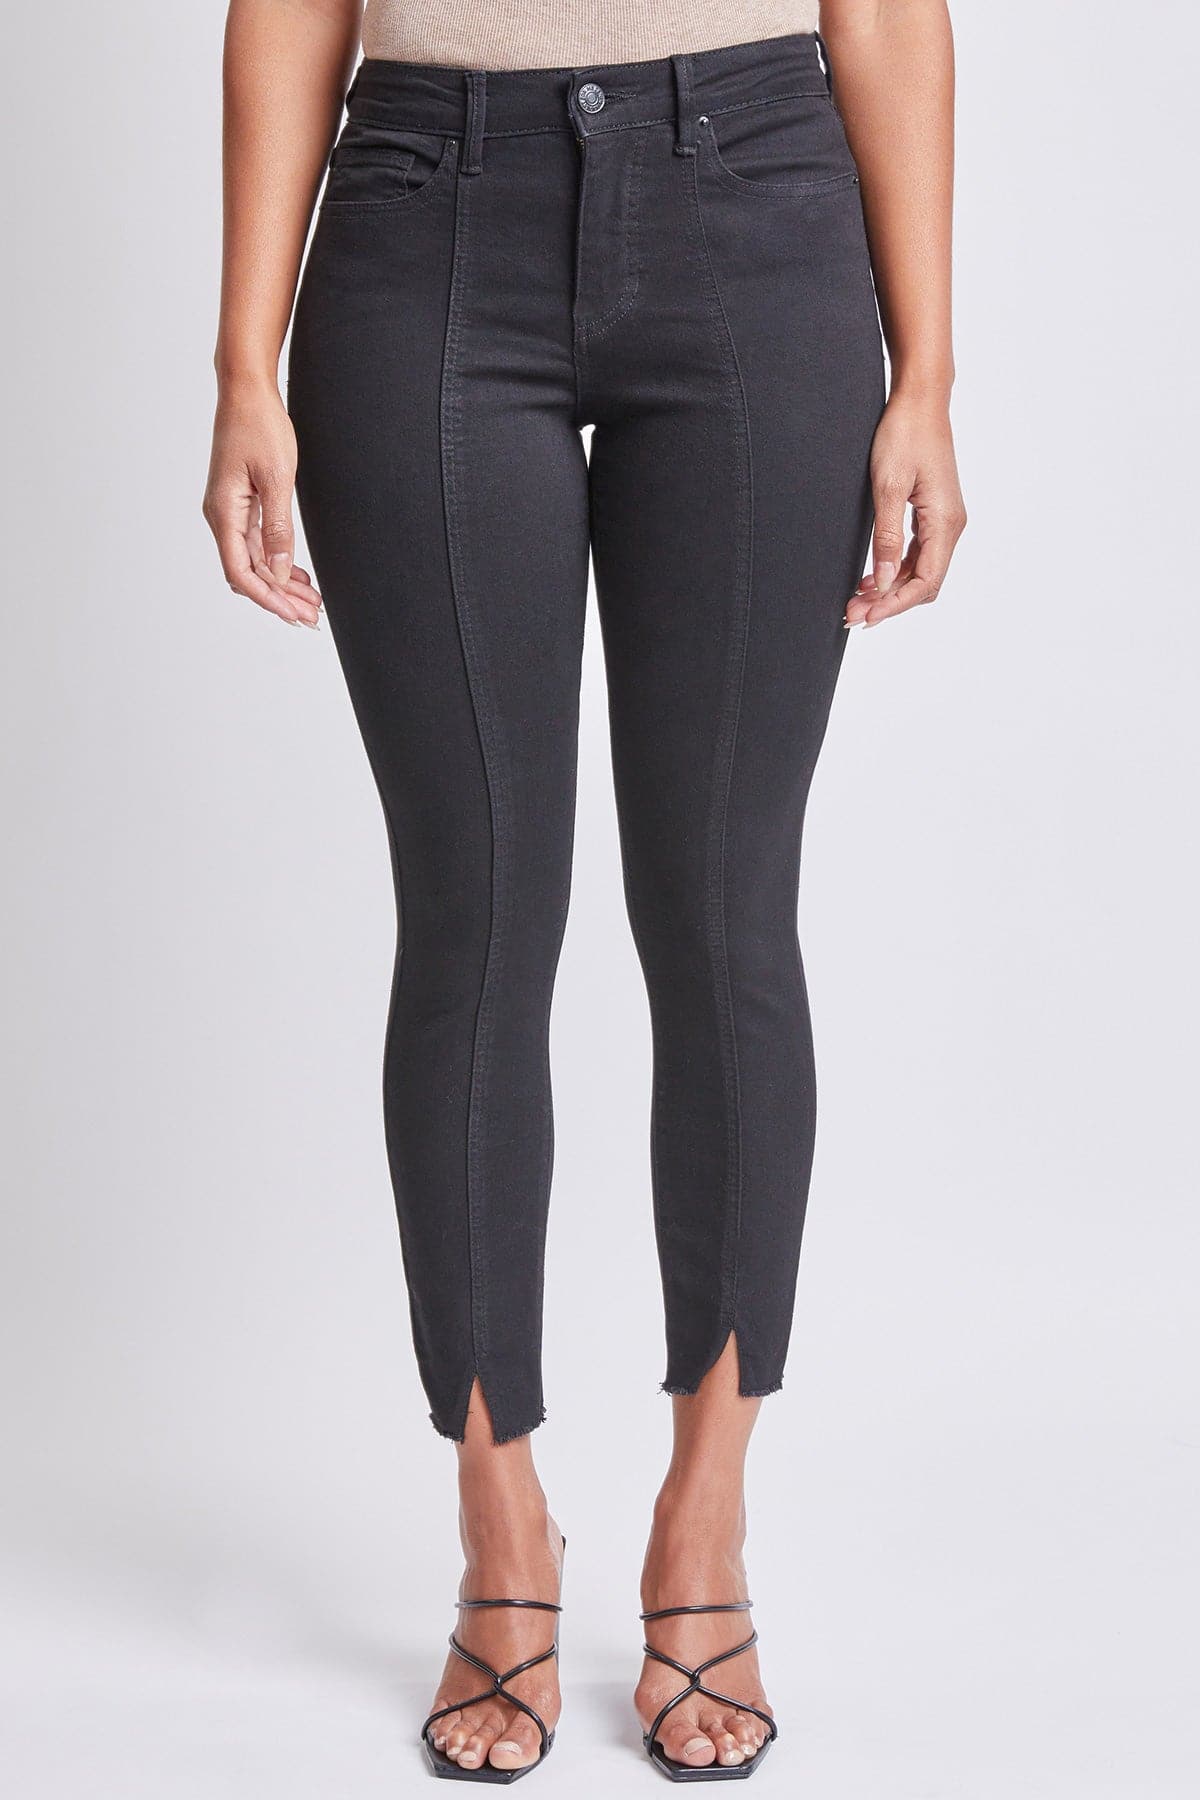 Women's High Rise Skinny Jean With Front Seam and Slit Detail Lifestyle Collection